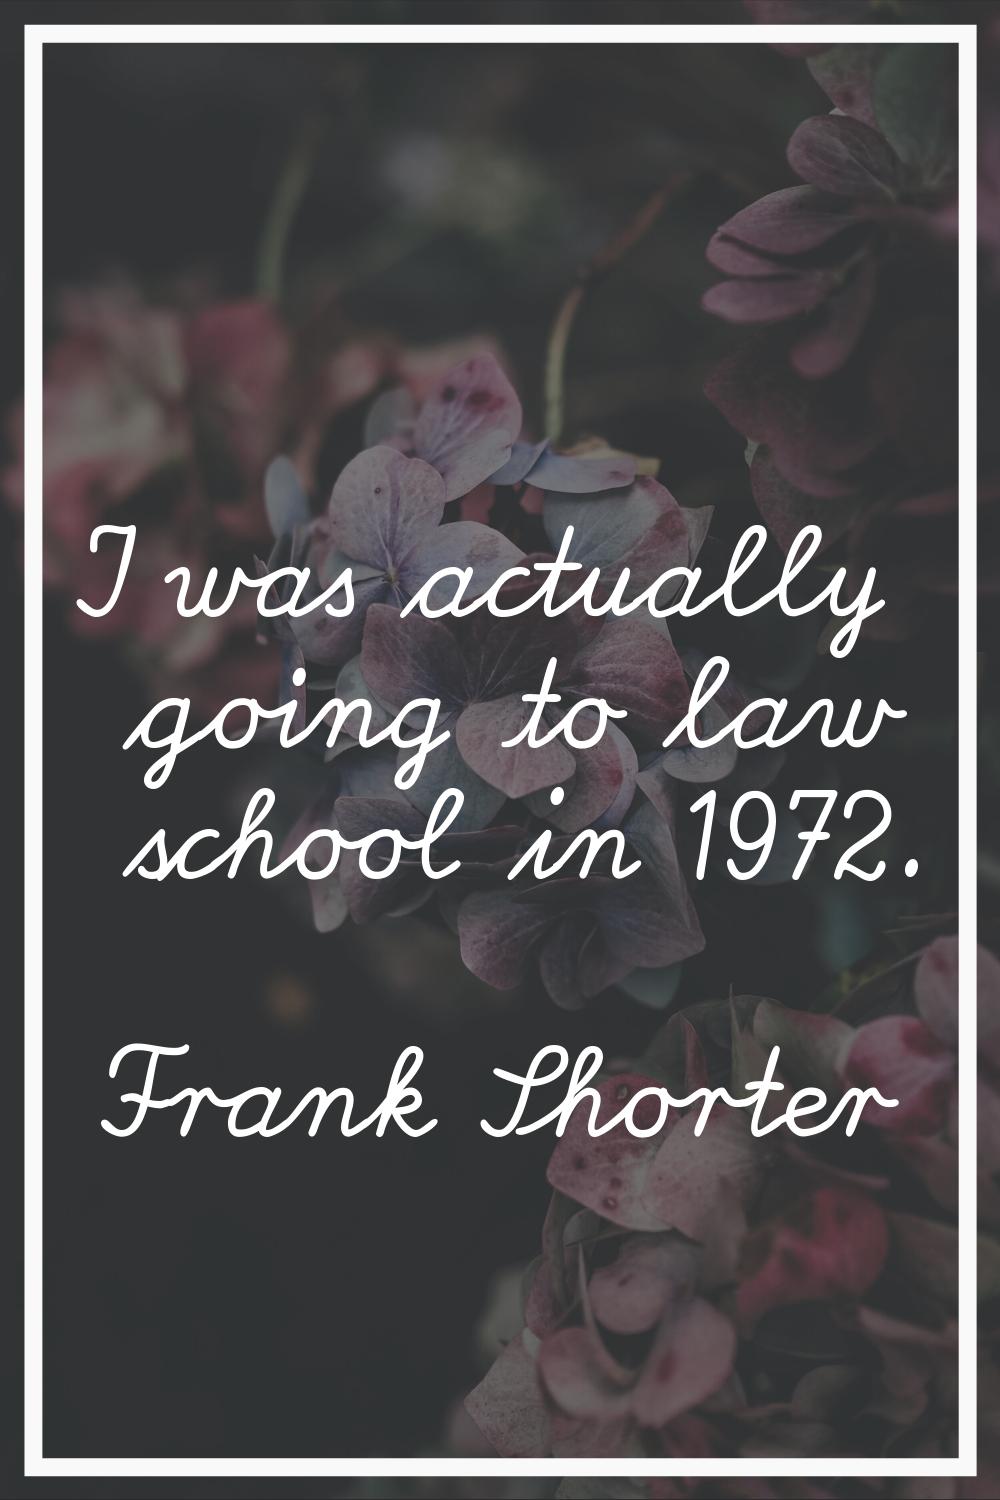 I was actually going to law school in 1972.